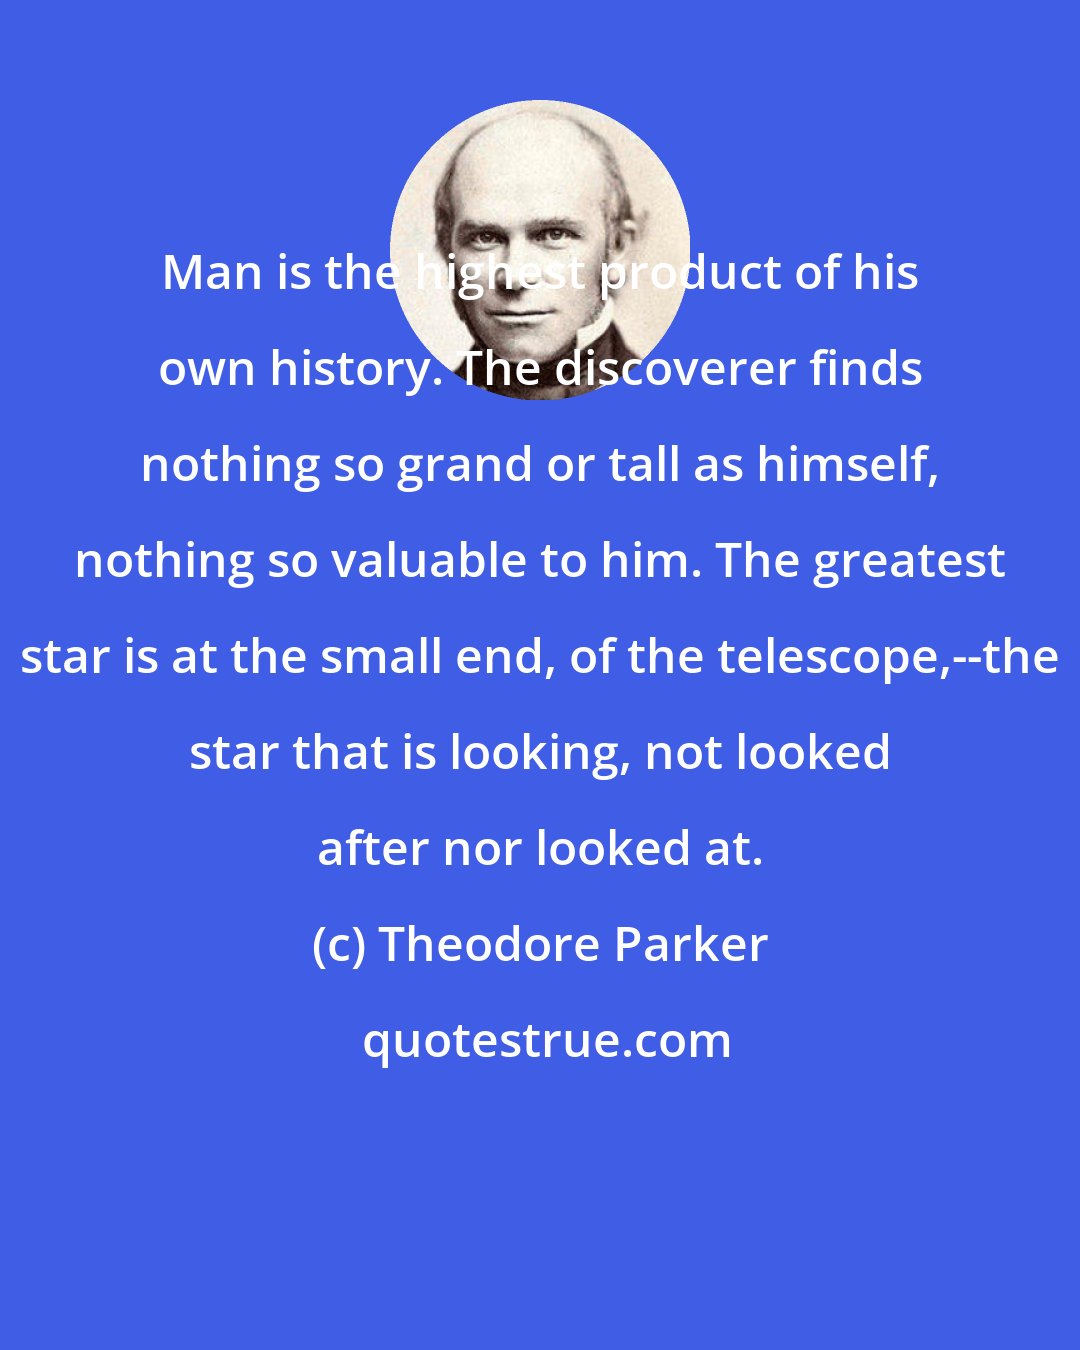 Theodore Parker: Man is the highest product of his own history. The discoverer finds nothing so grand or tall as himself, nothing so valuable to him. The greatest star is at the small end, of the telescope,--the star that is looking, not looked after nor looked at.